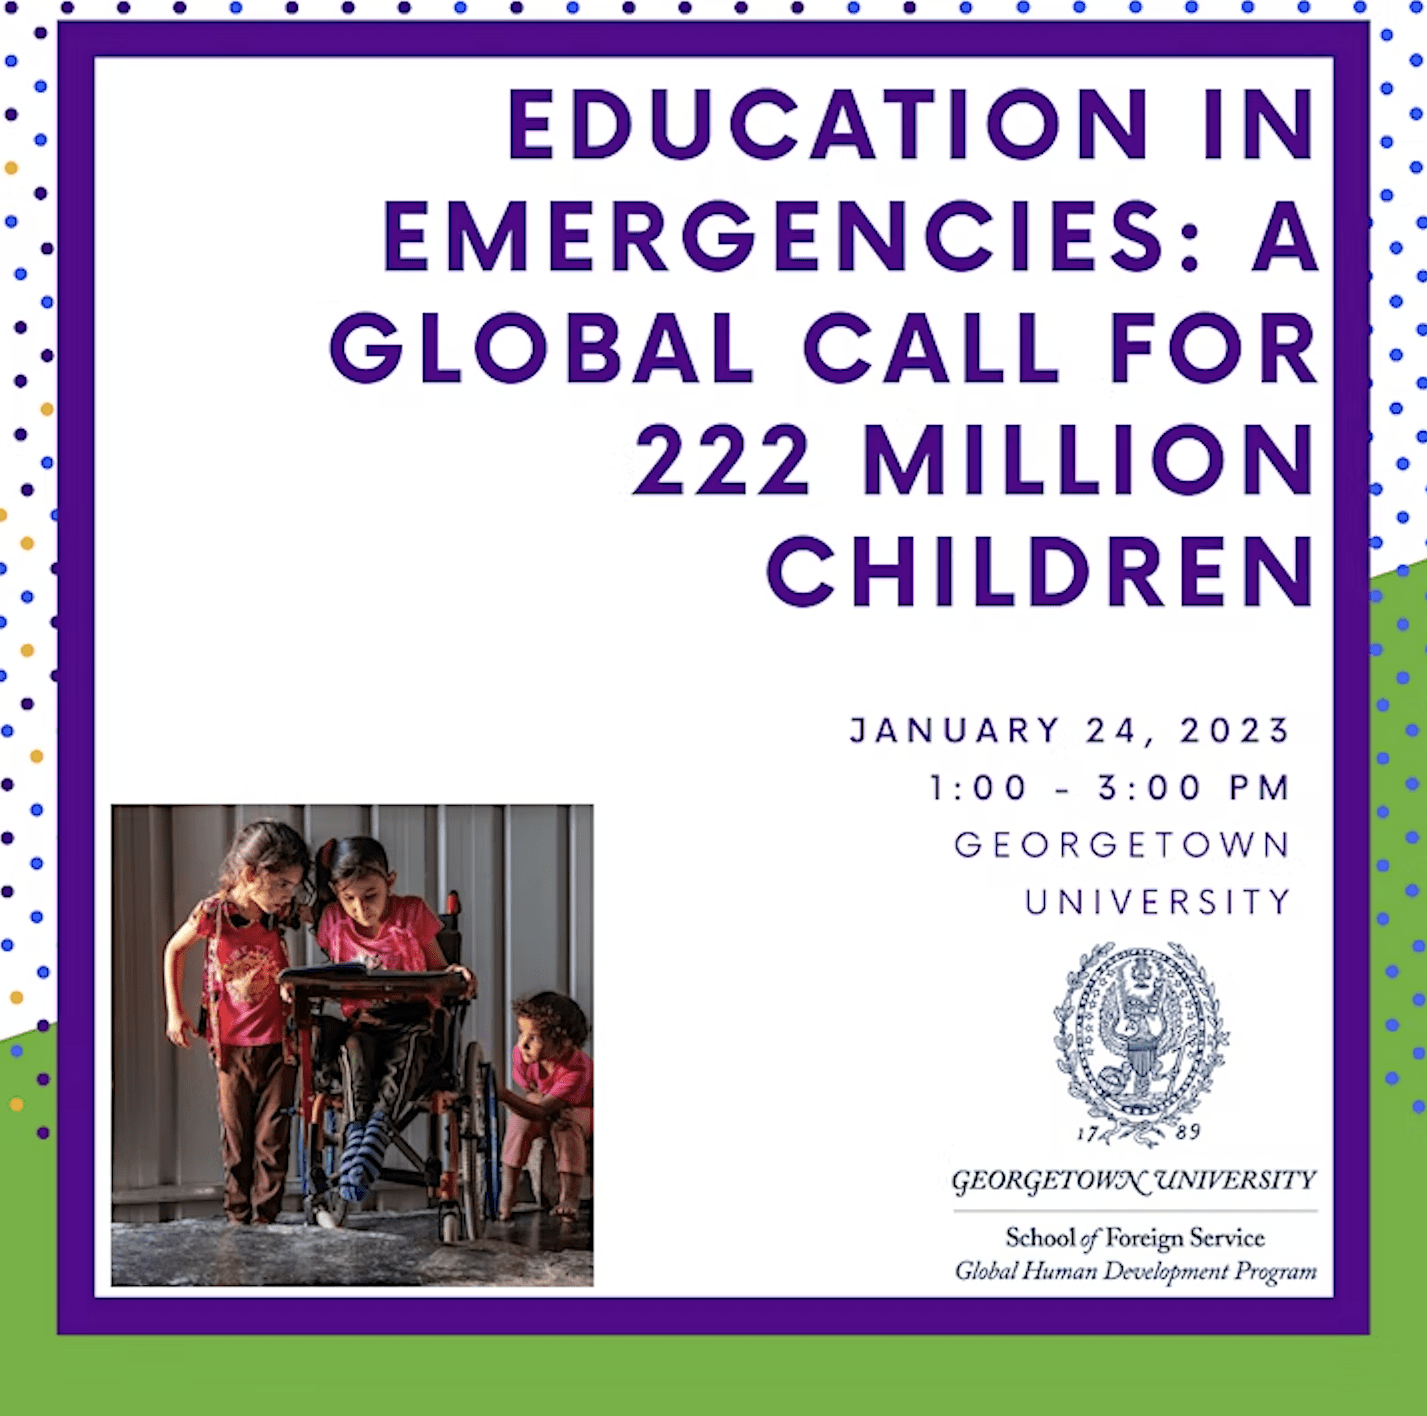 Education in Emergencies: A Global Call for 222 Million Children on January 24, 2023, 1-3 pm ET, at Georgetown University School of Foreign Service Global Human Development Program